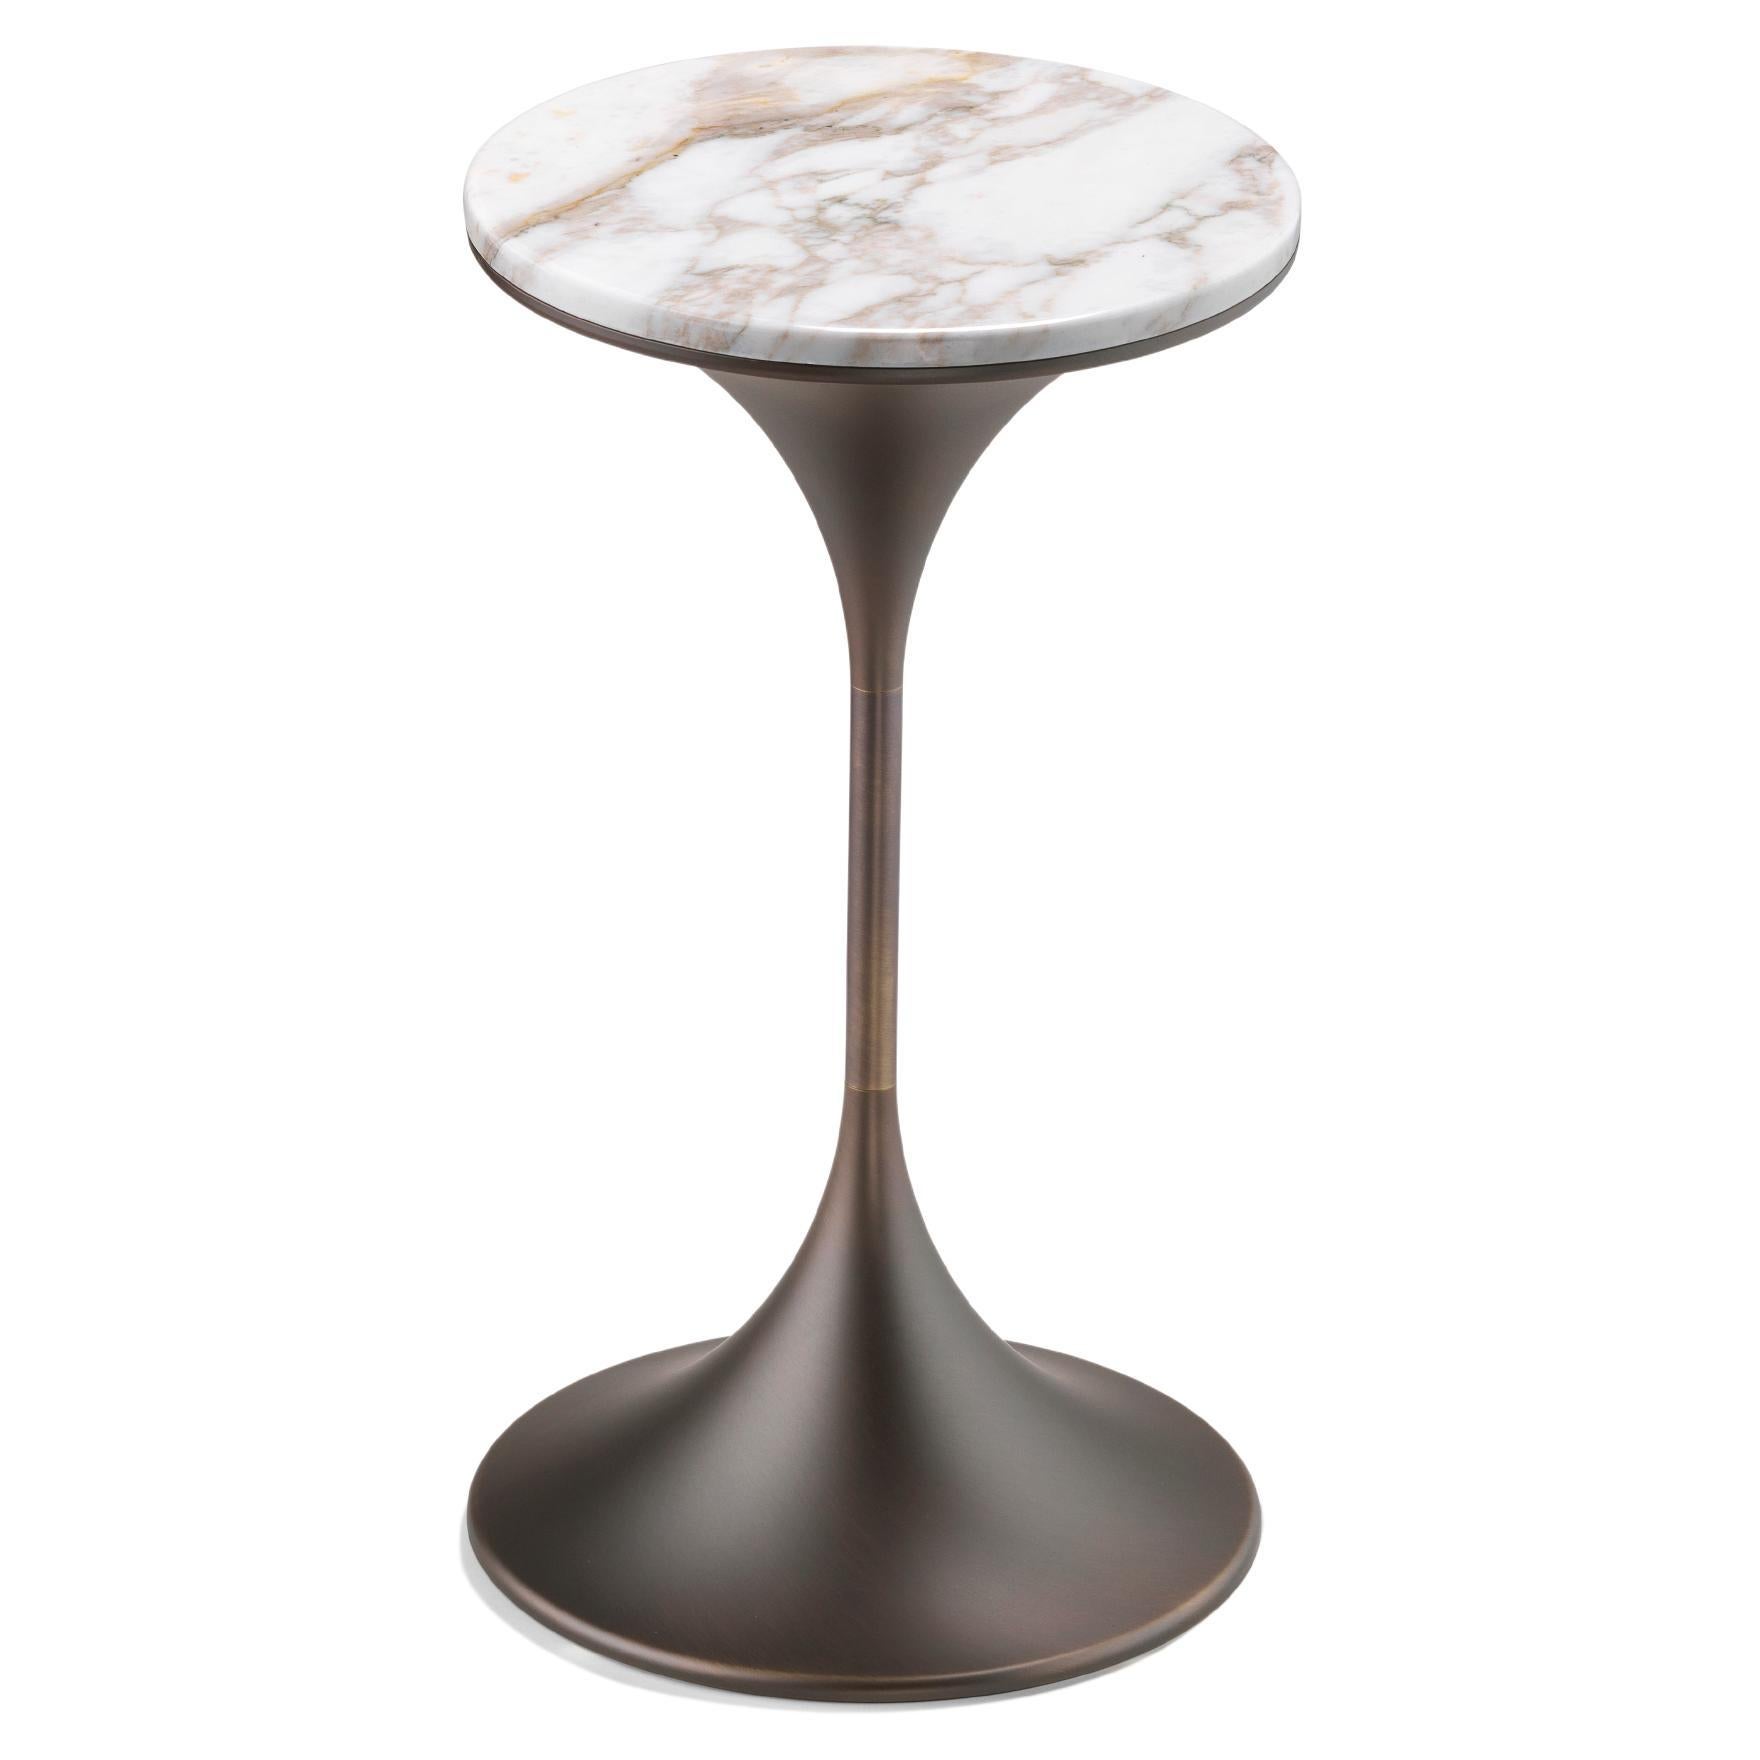 Dapertutto Tall Table, Calacatta Gold Top, Burnished Brass , Made in Italy For Sale